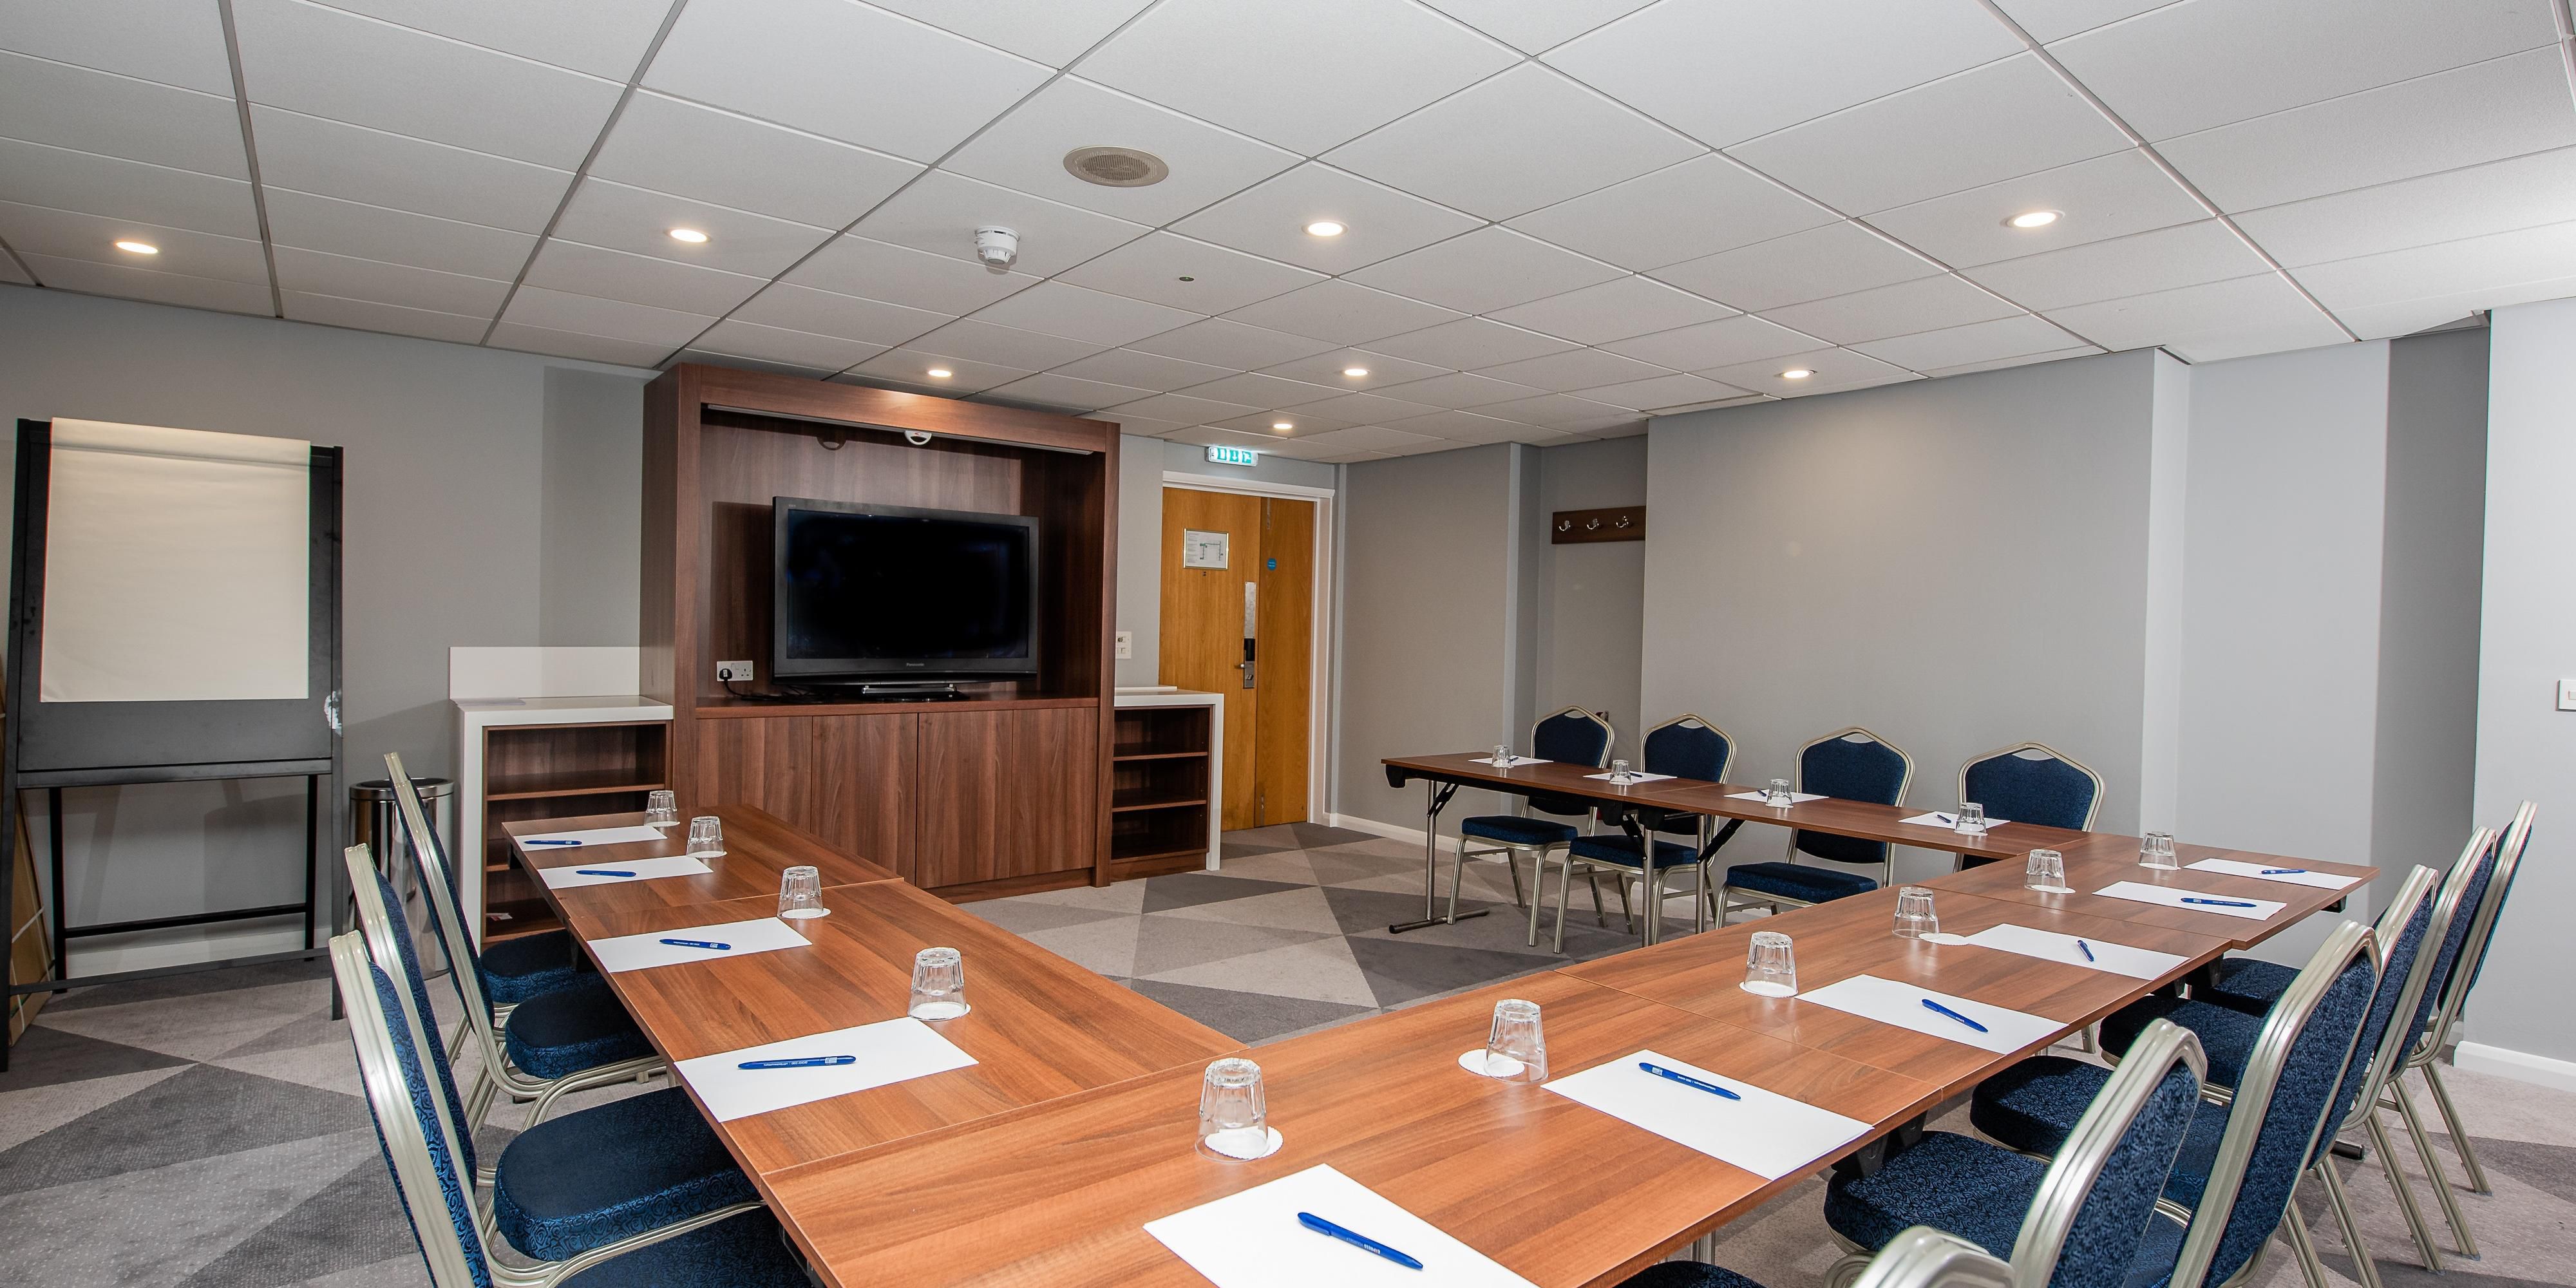 Business visitors can take advantage of the free WiFi to catch up on work with a tea or coffee from the hotel bar. The light-filled Great Room or our Meeing rooms will be  the ideal location to hold informal meetings with clients or colleagues in comfy surroundings.